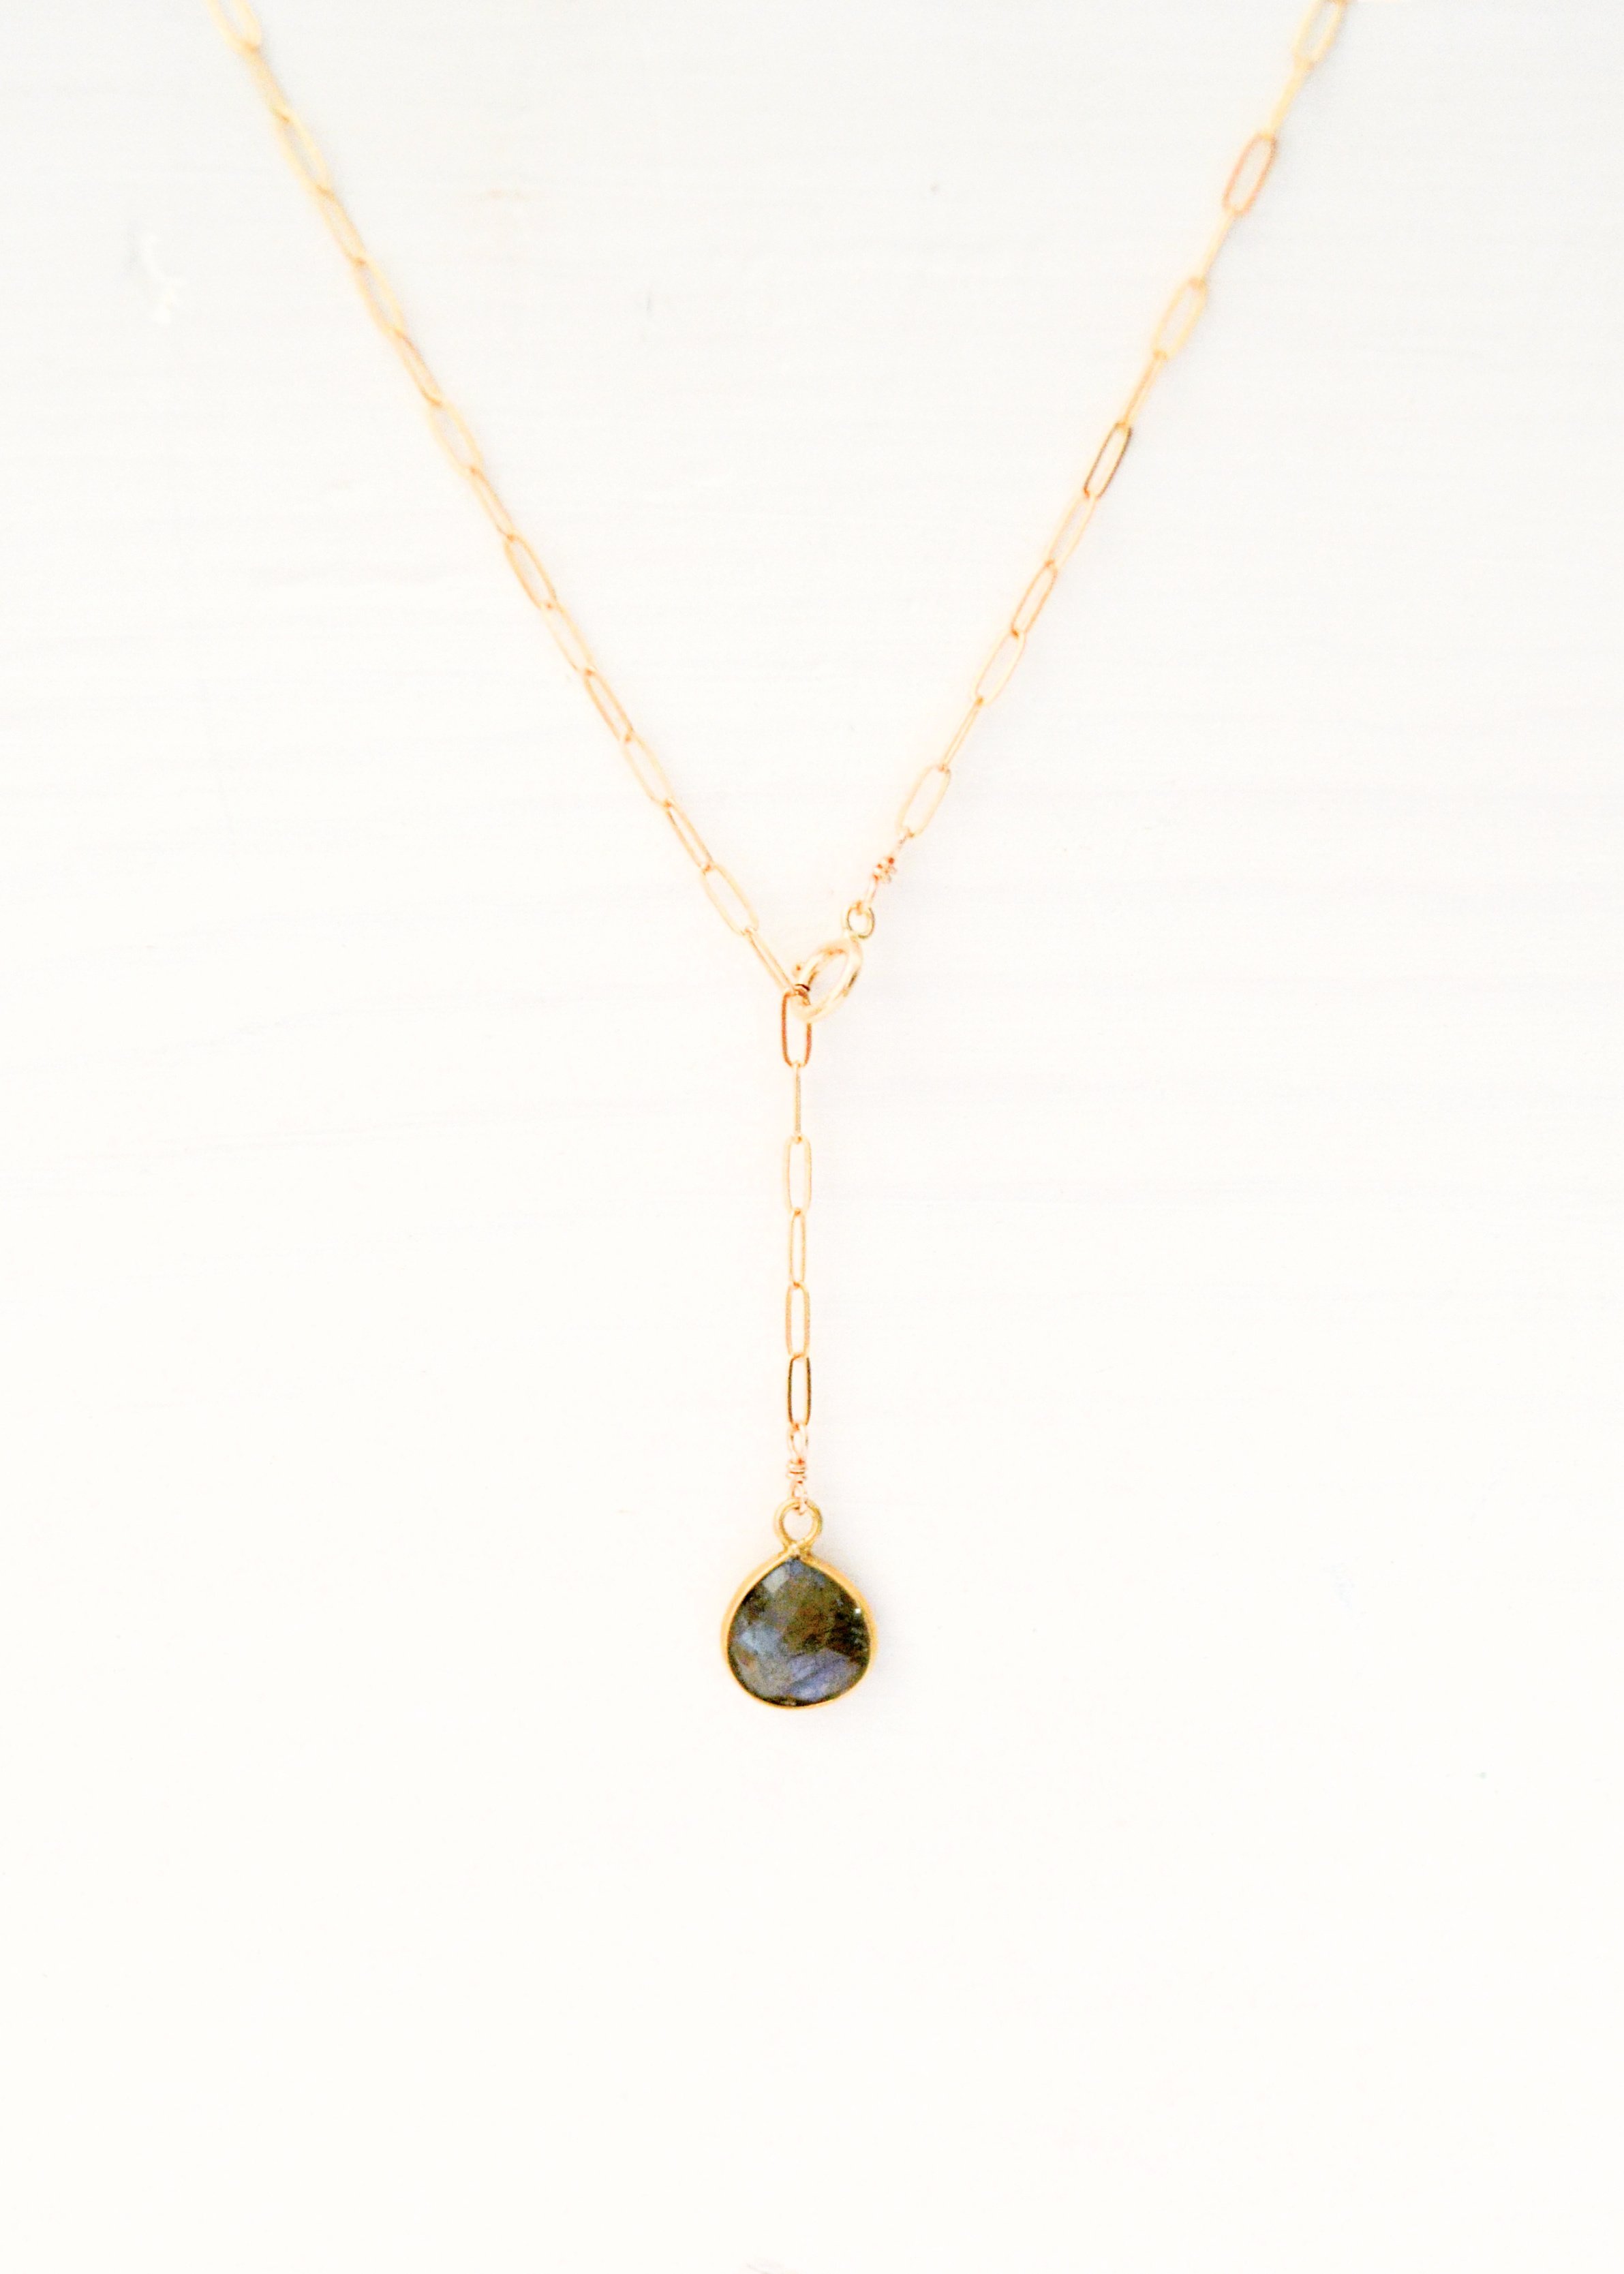 New Arrivals — Boy Cherie Jewelry: Delicate Fashion Jewelry That Won't ...